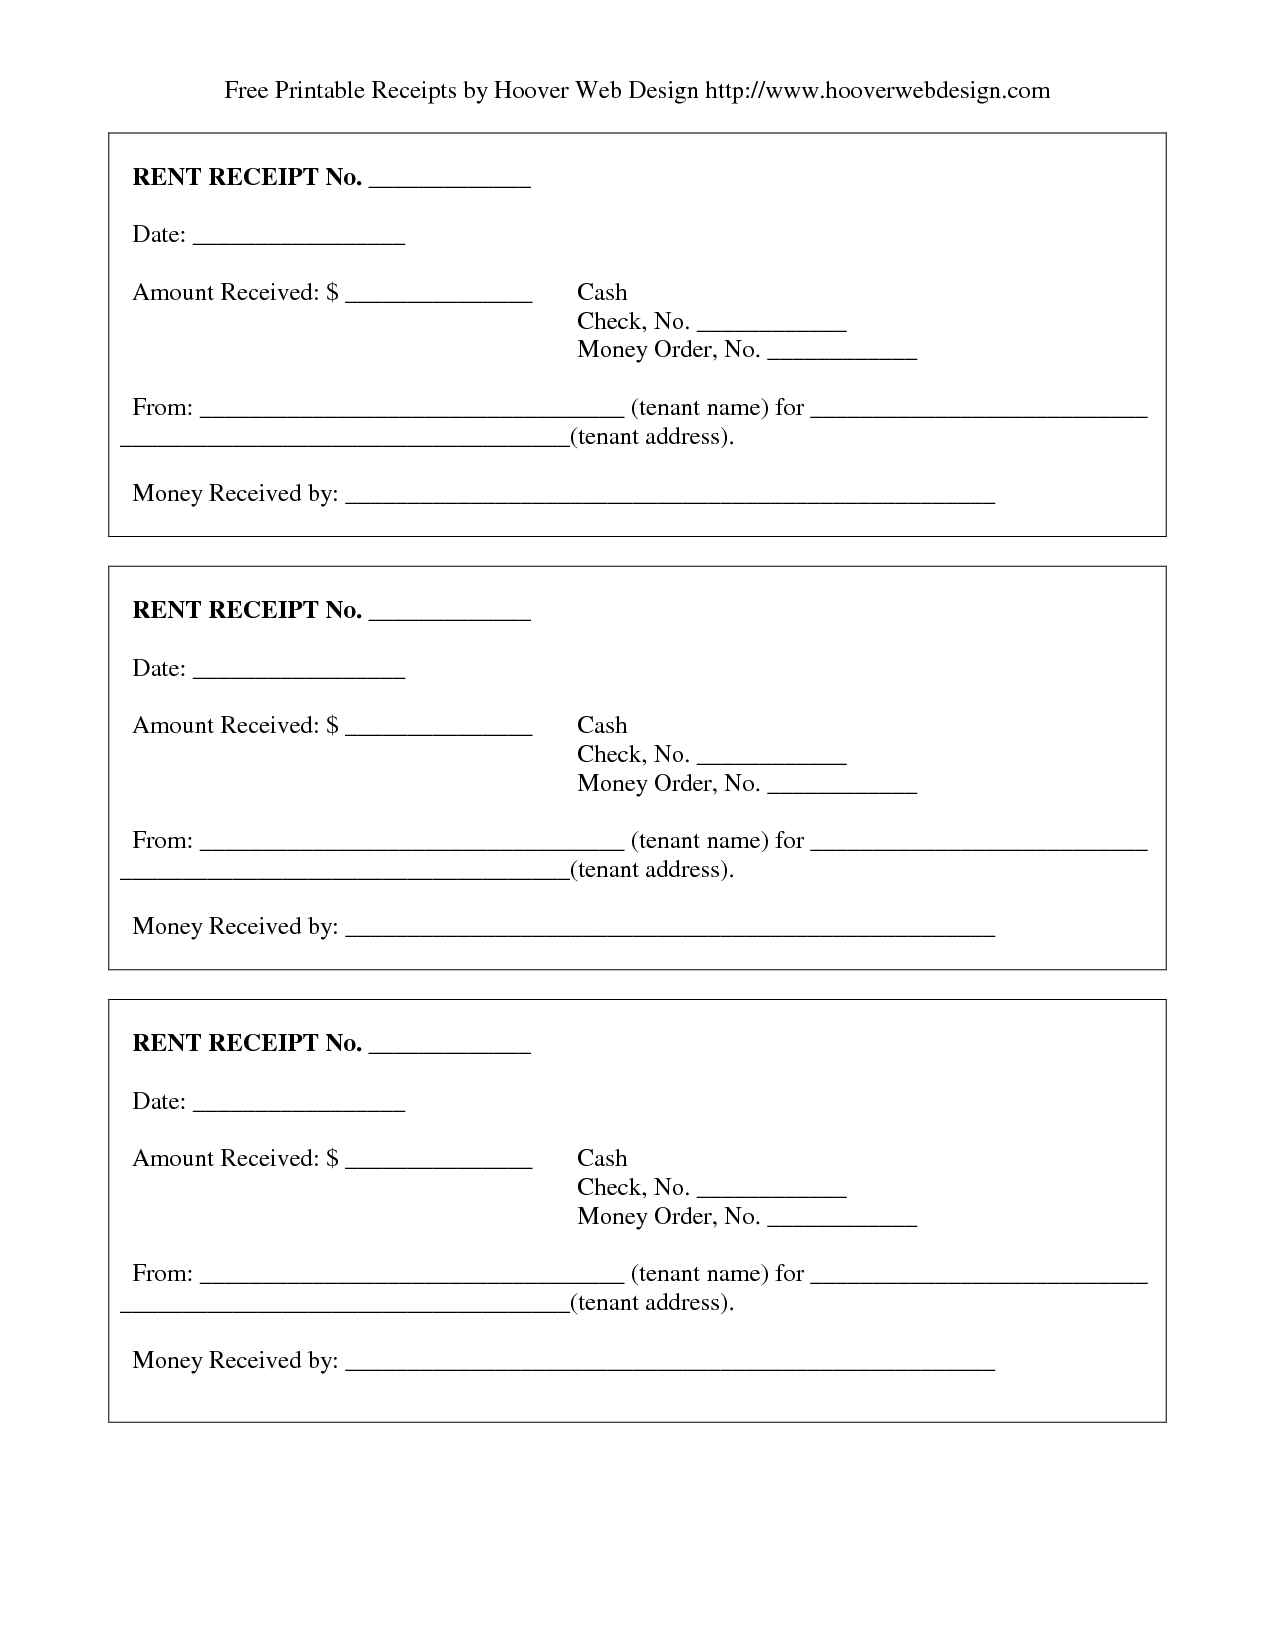 free-fillable-rent-receipt-template